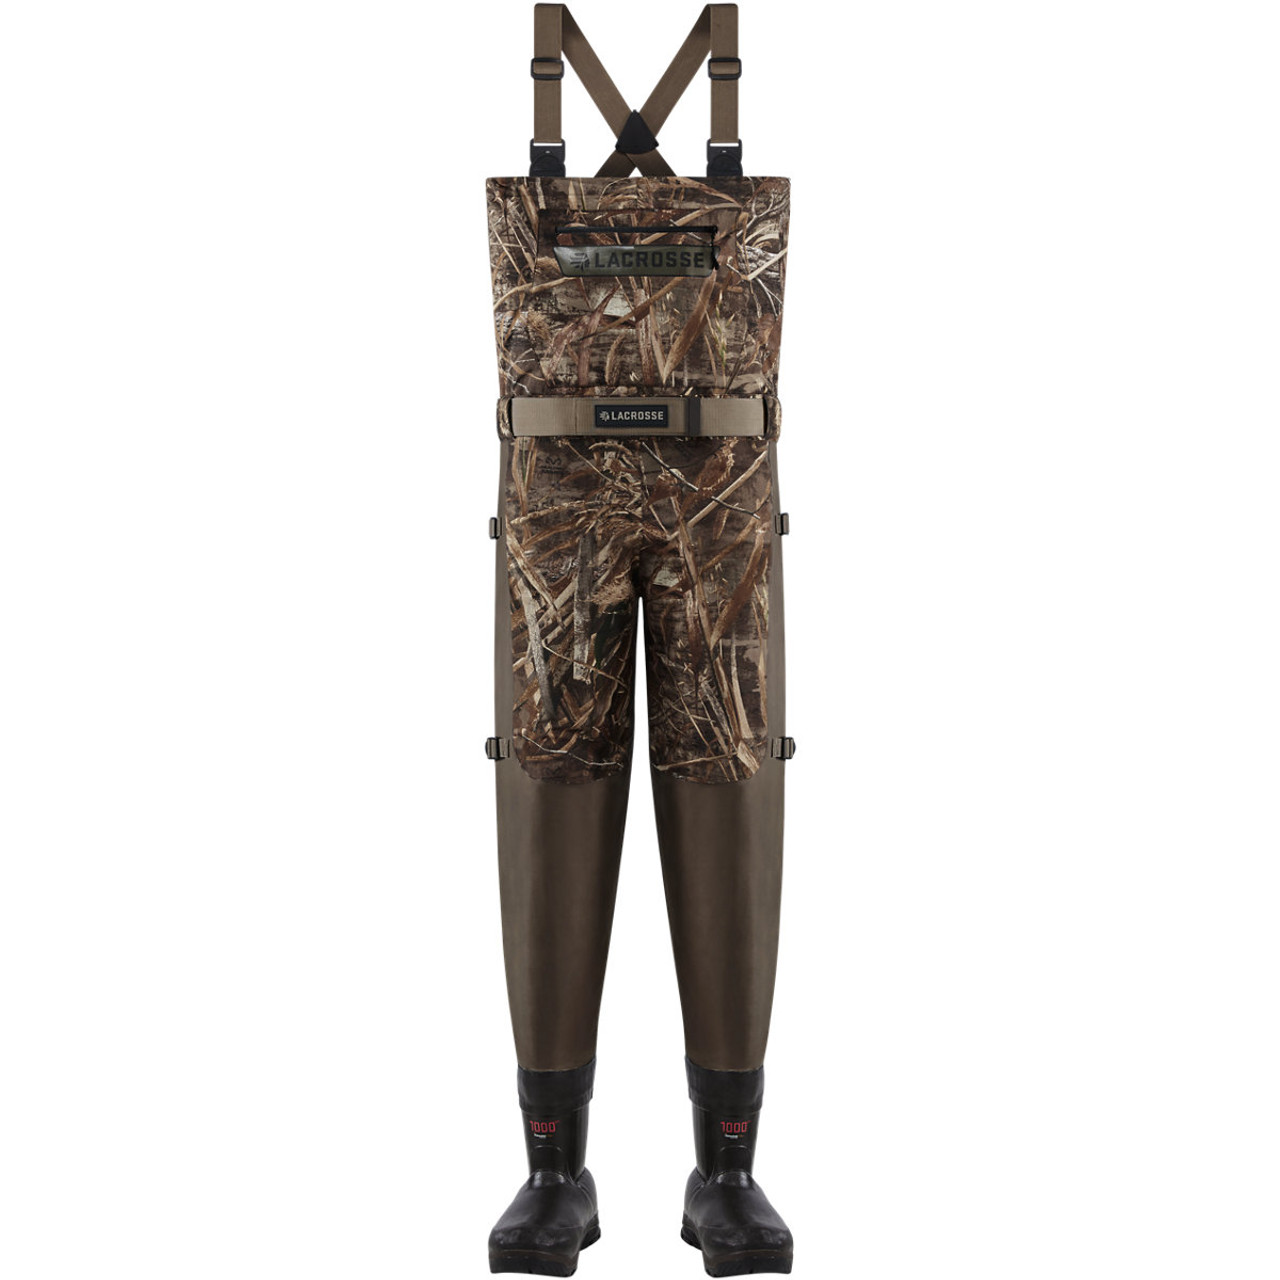 LACROSSE INSULATED ALPHA SWAMPFOX MEN'S REALTREE MAX-5 1000G WADERS BOOTS 700088